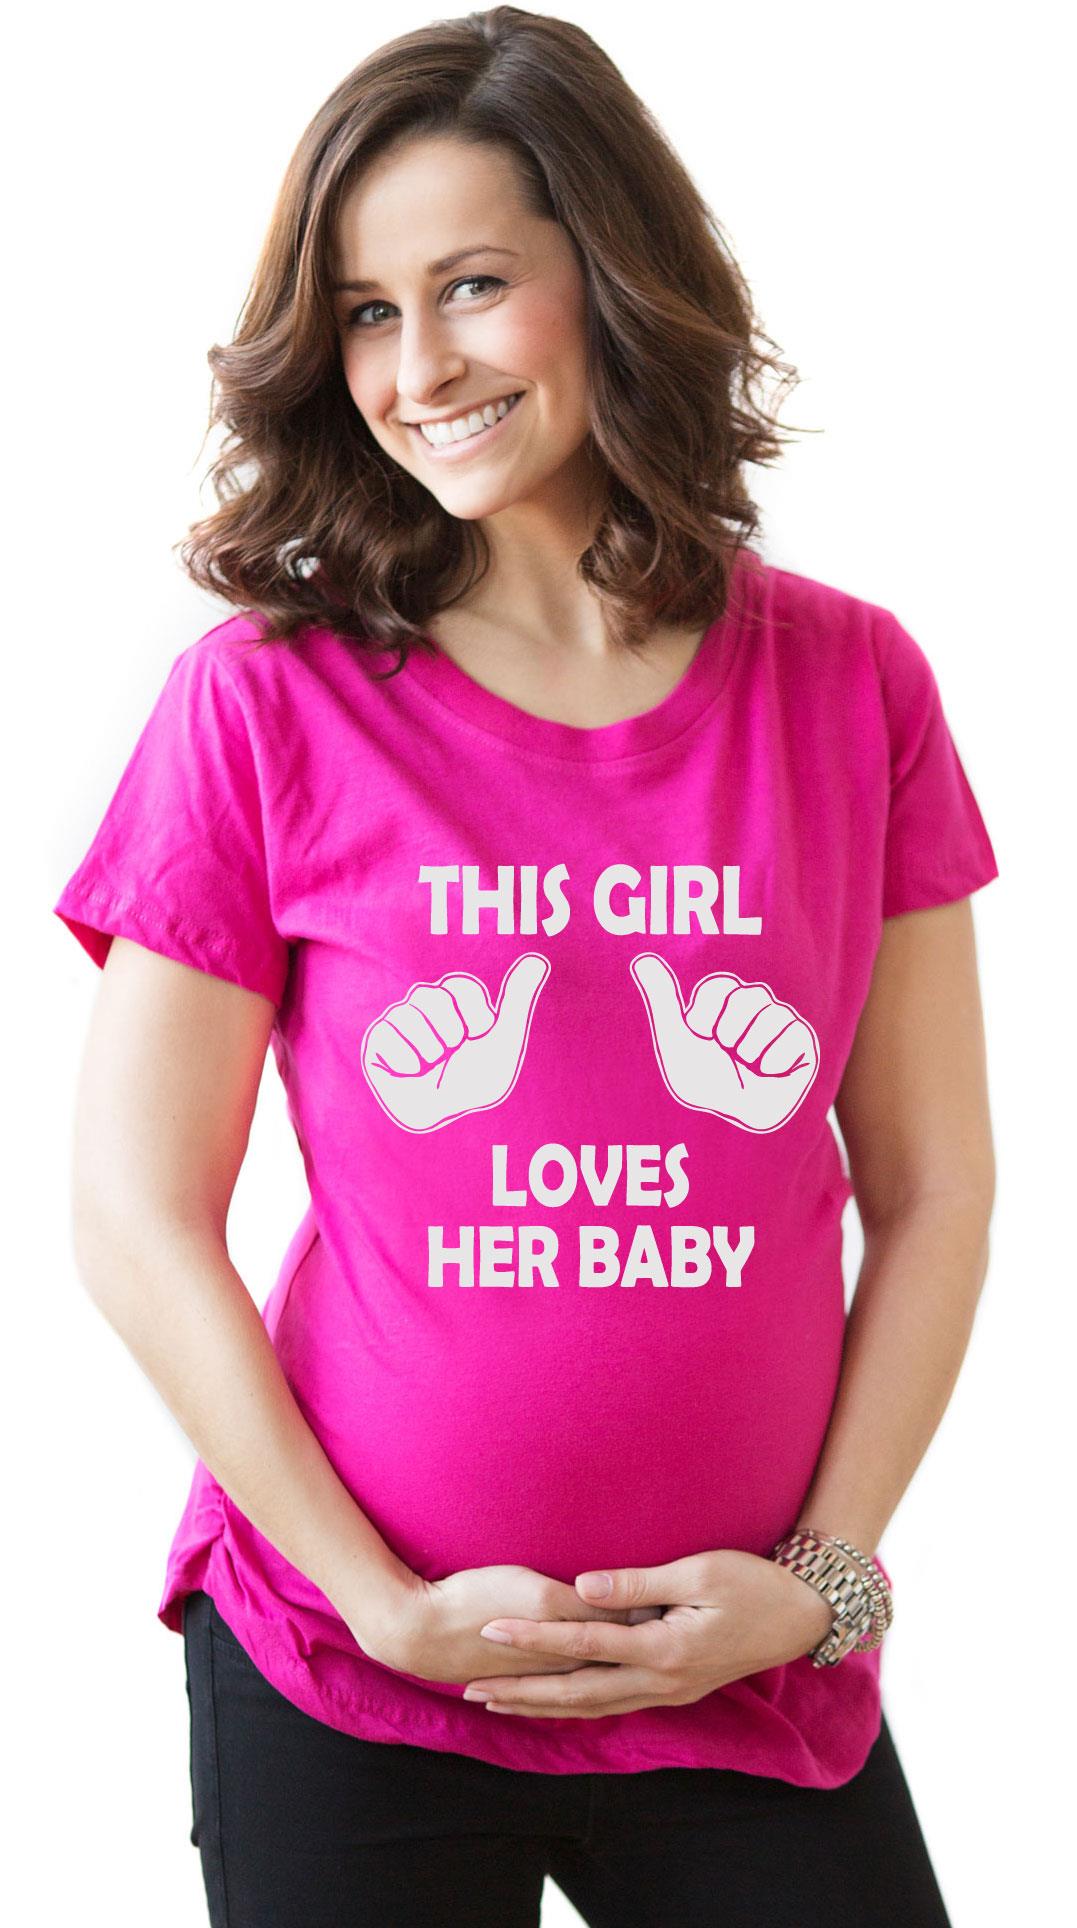 This Girl Loves Her Baby Maternity T Shirt Funny Pregnancy Tee Shirt For Expecting Moms (Heather Pink) XL